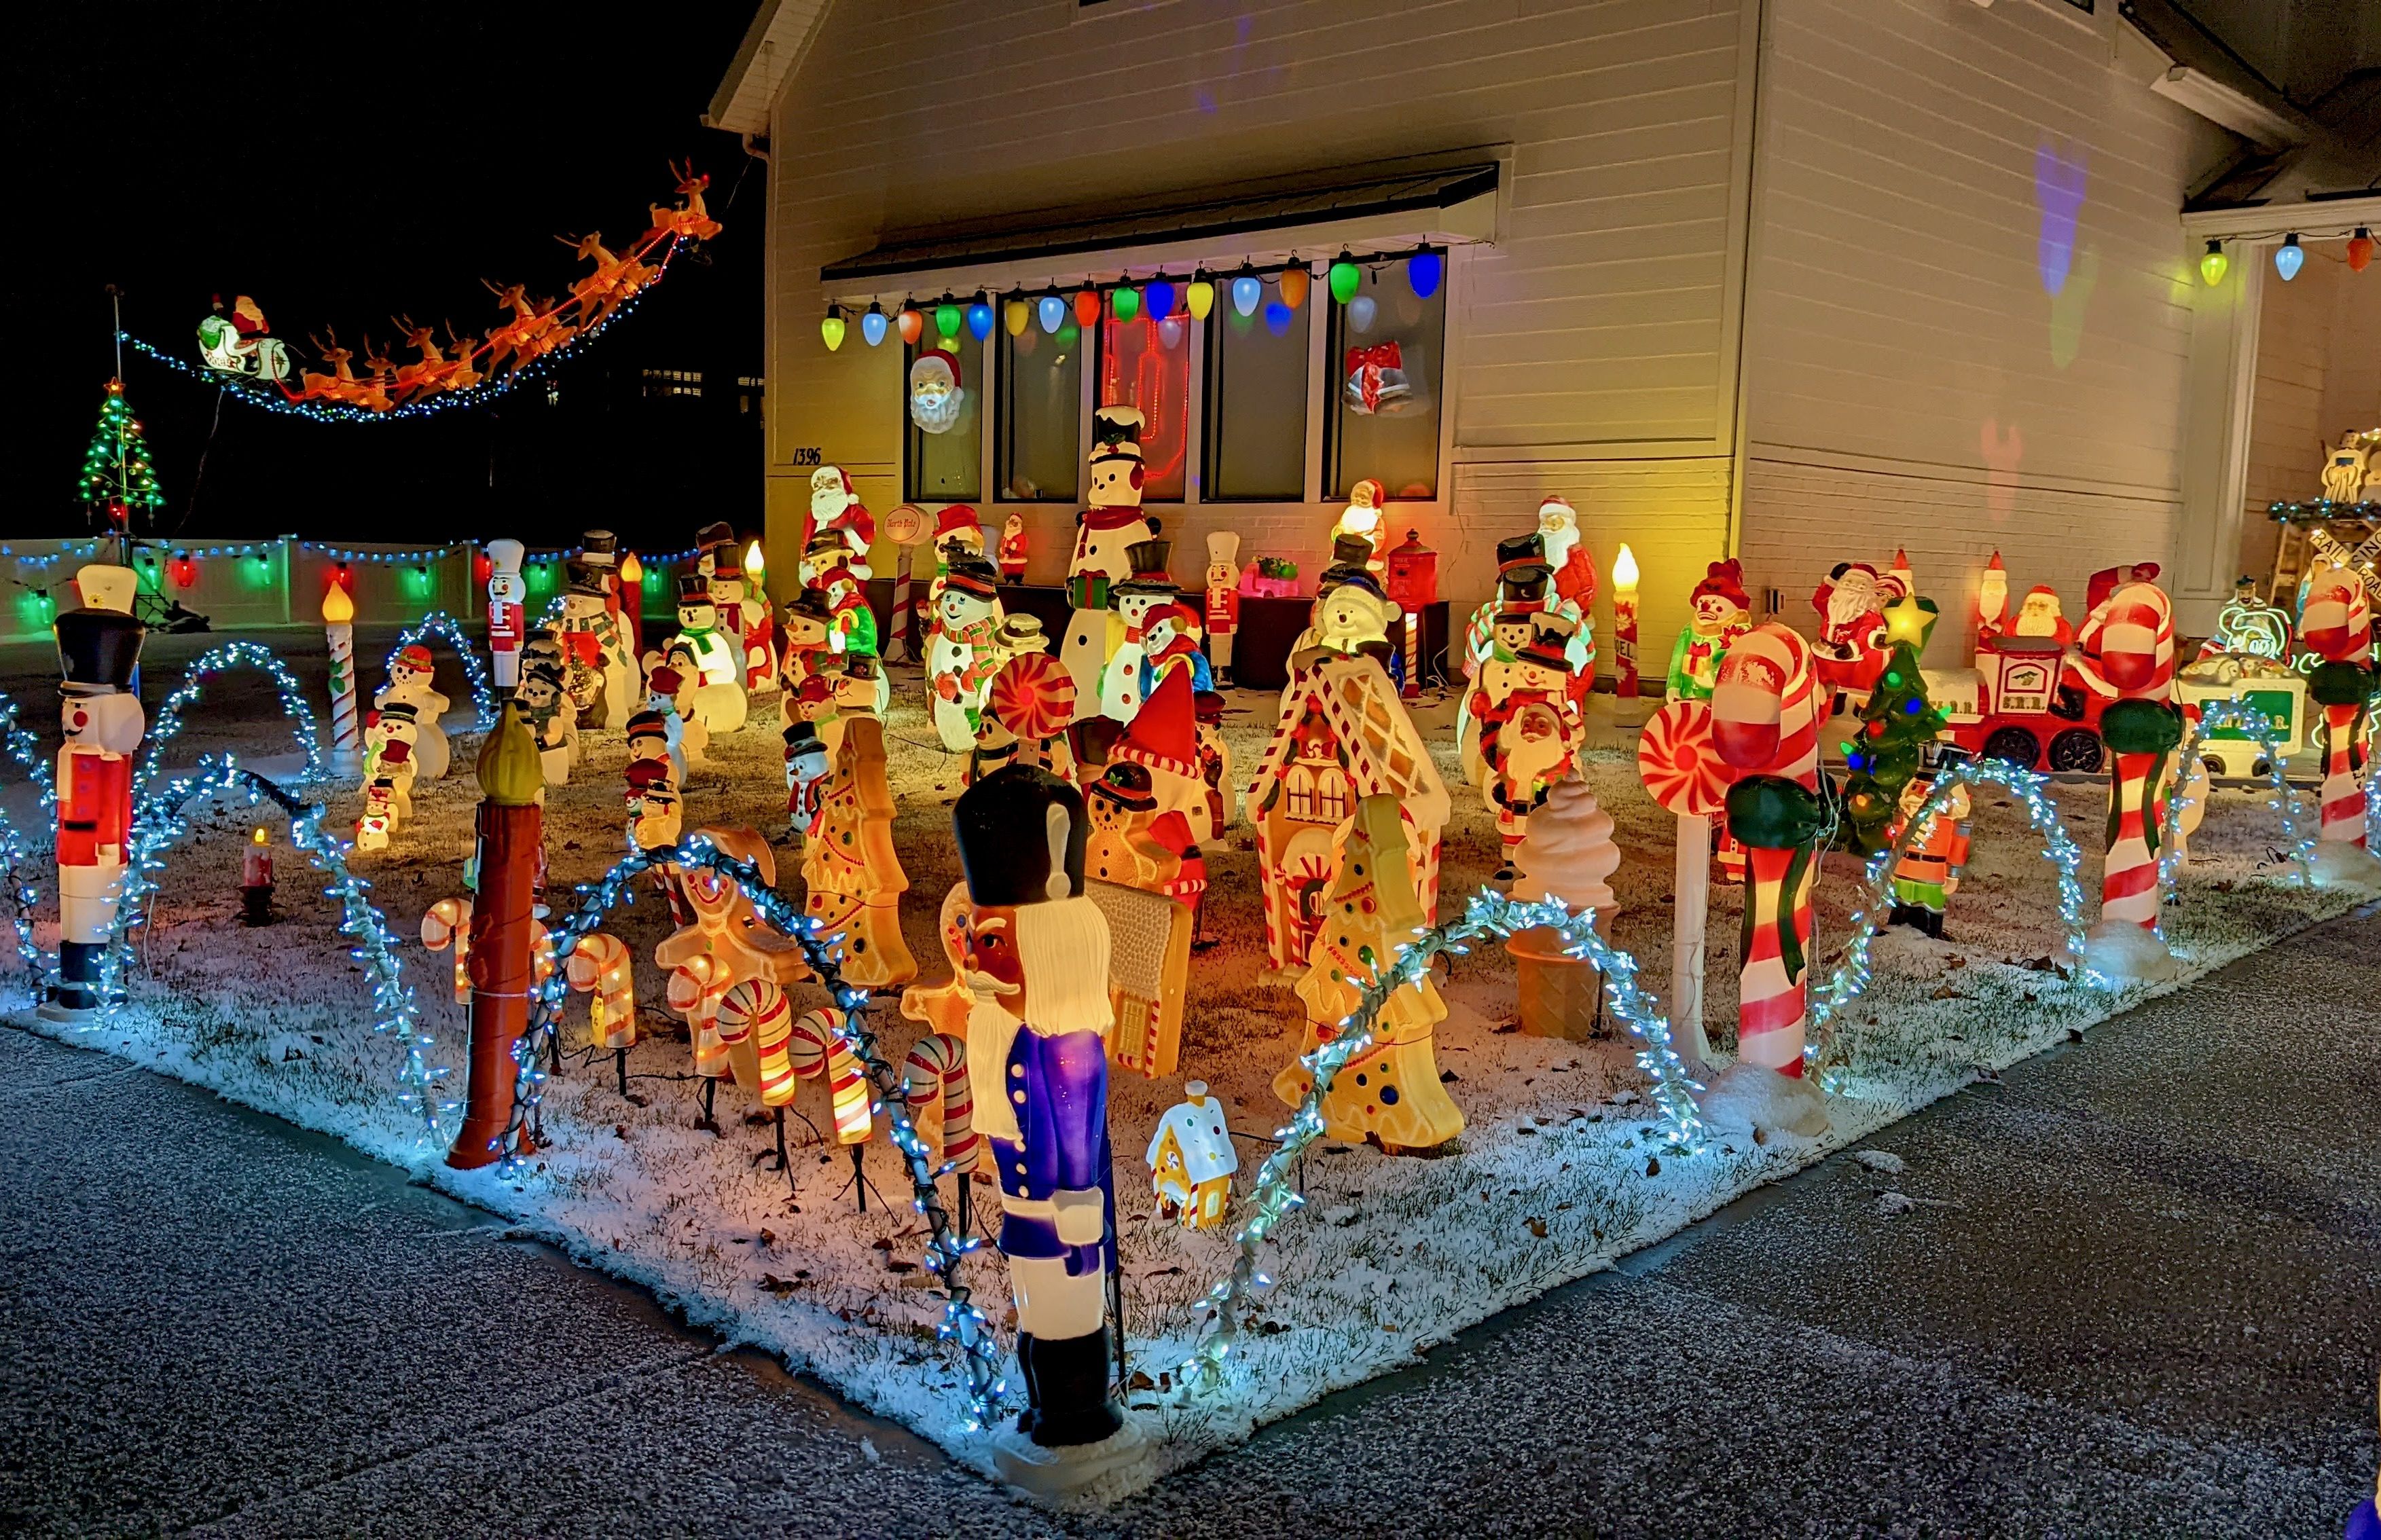 Dozens of Christmas figurines are lighted in a lawn, with a light-up Santa and reindeer ascending toward the roof. 